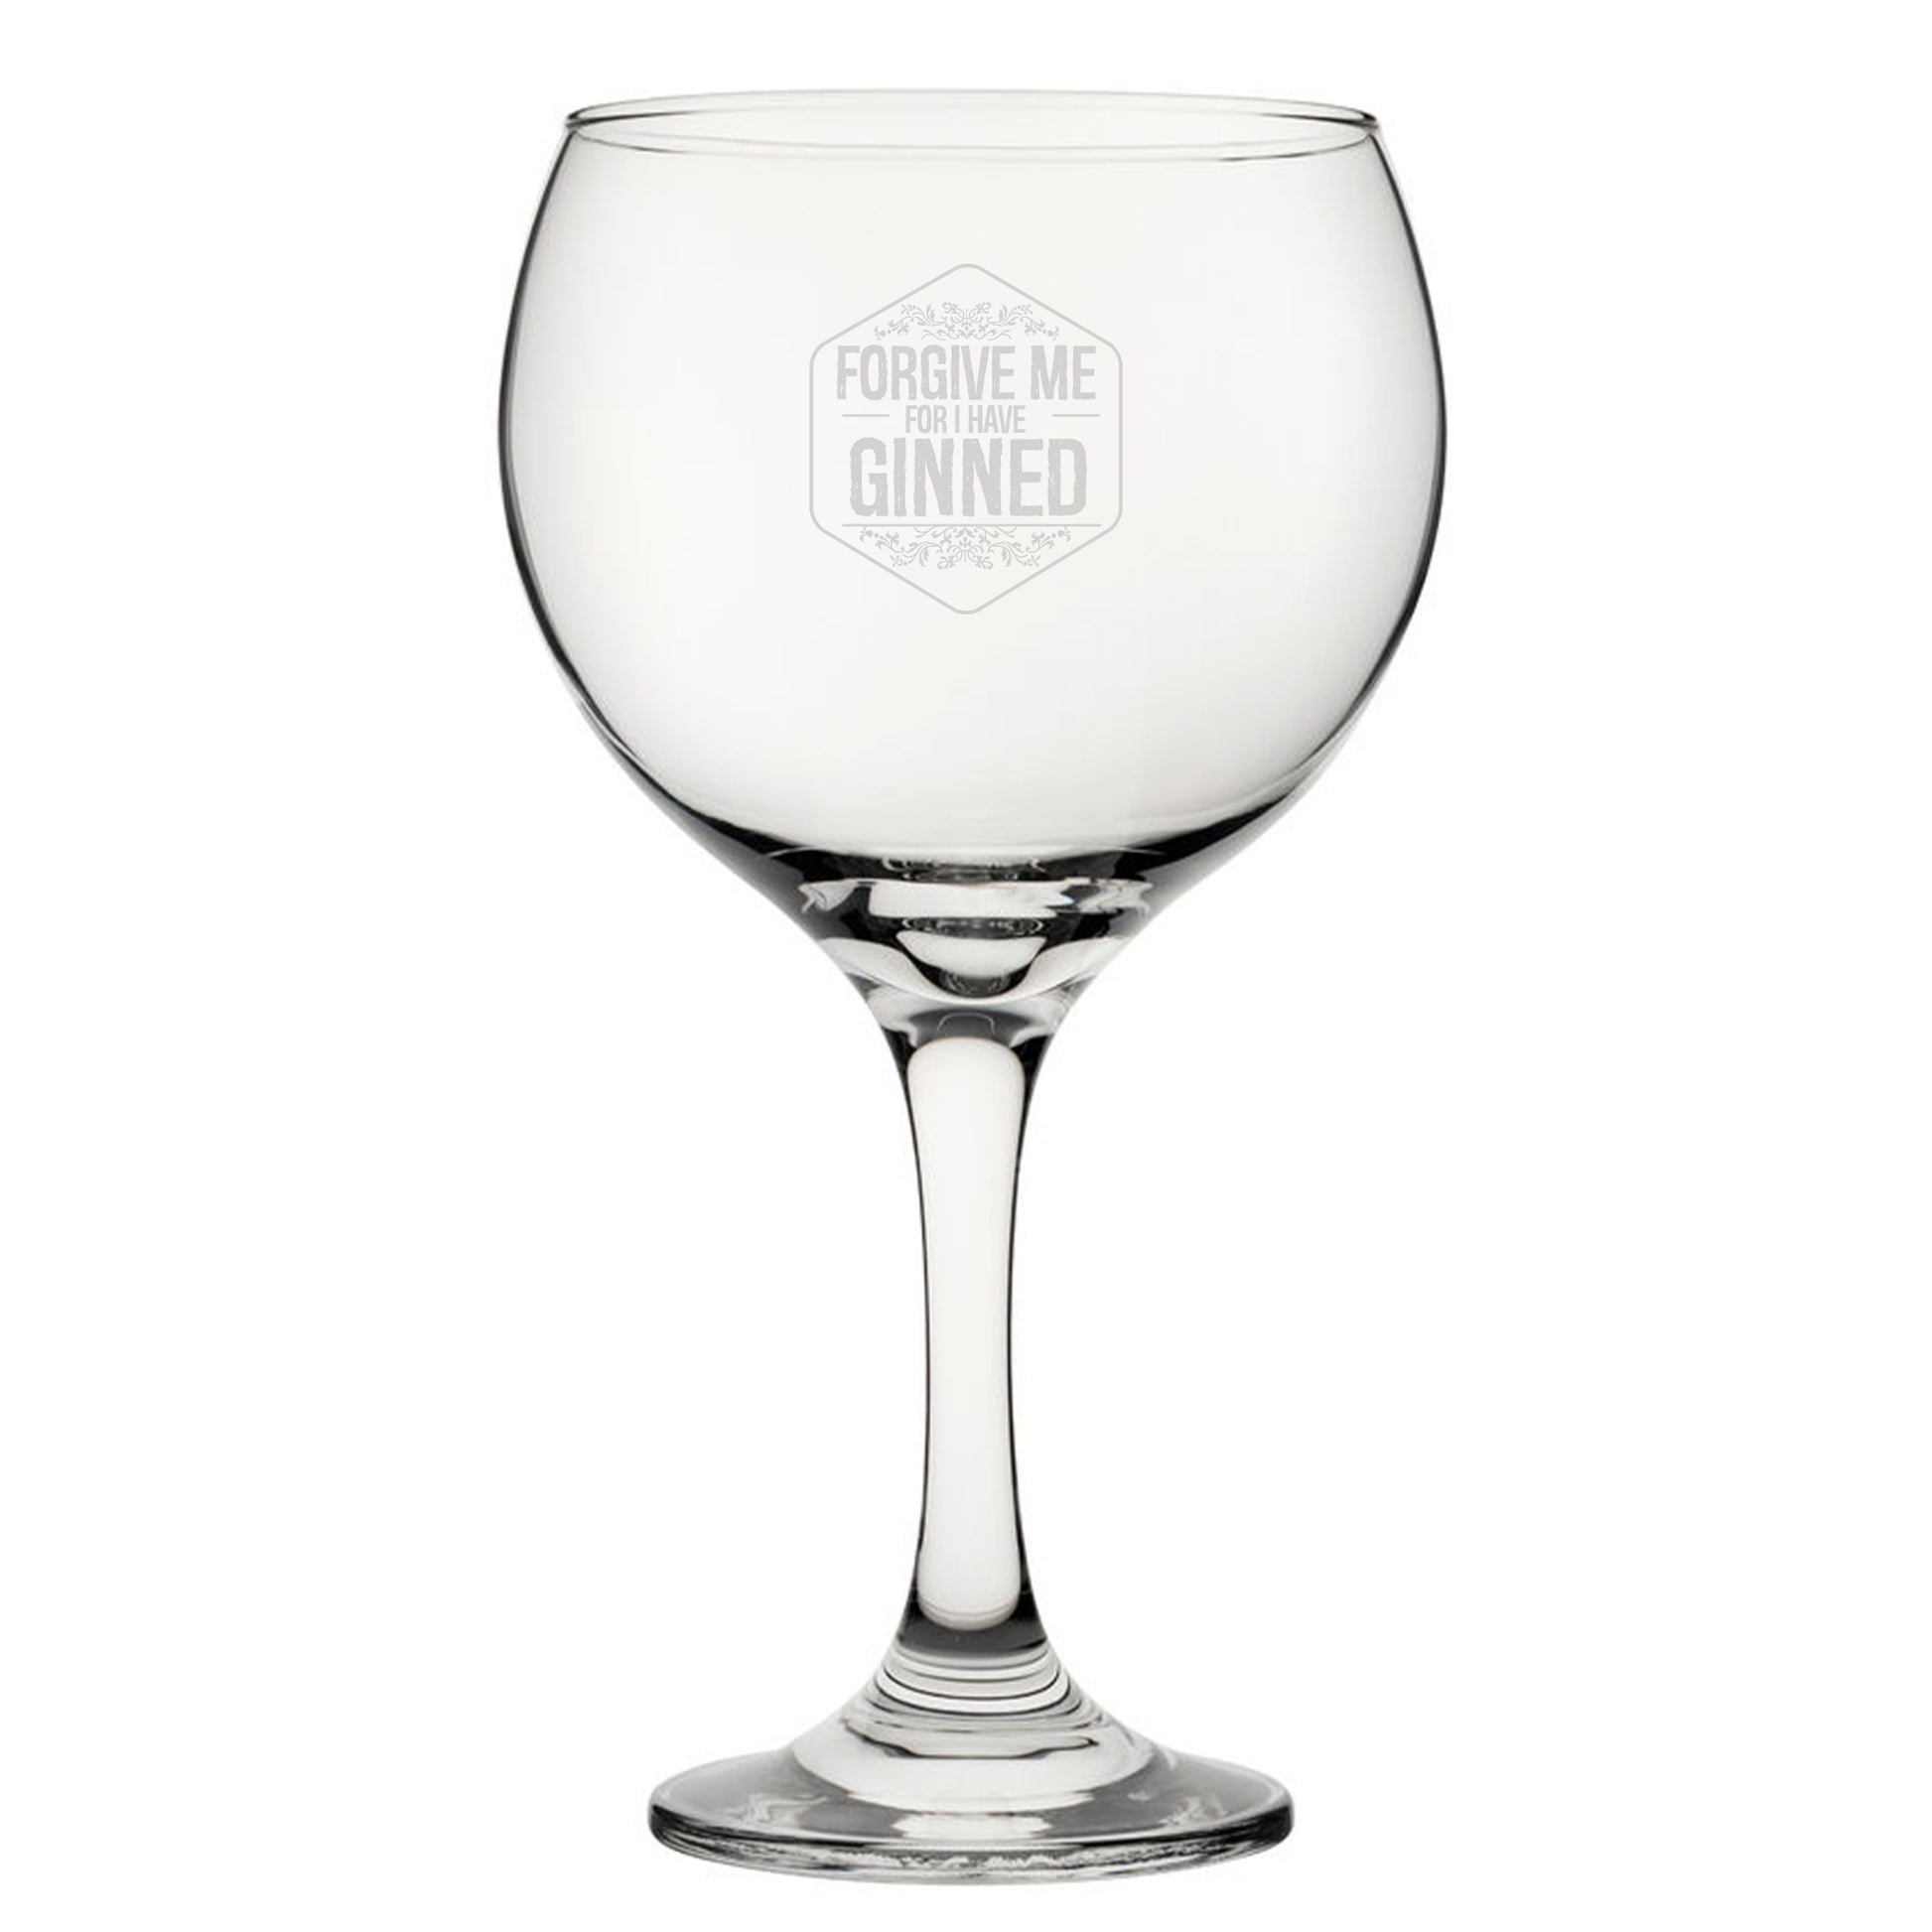 Forgive Me For I Have Ginned - Engraved Novelty Gin Balloon Cocktail Glass Image 2